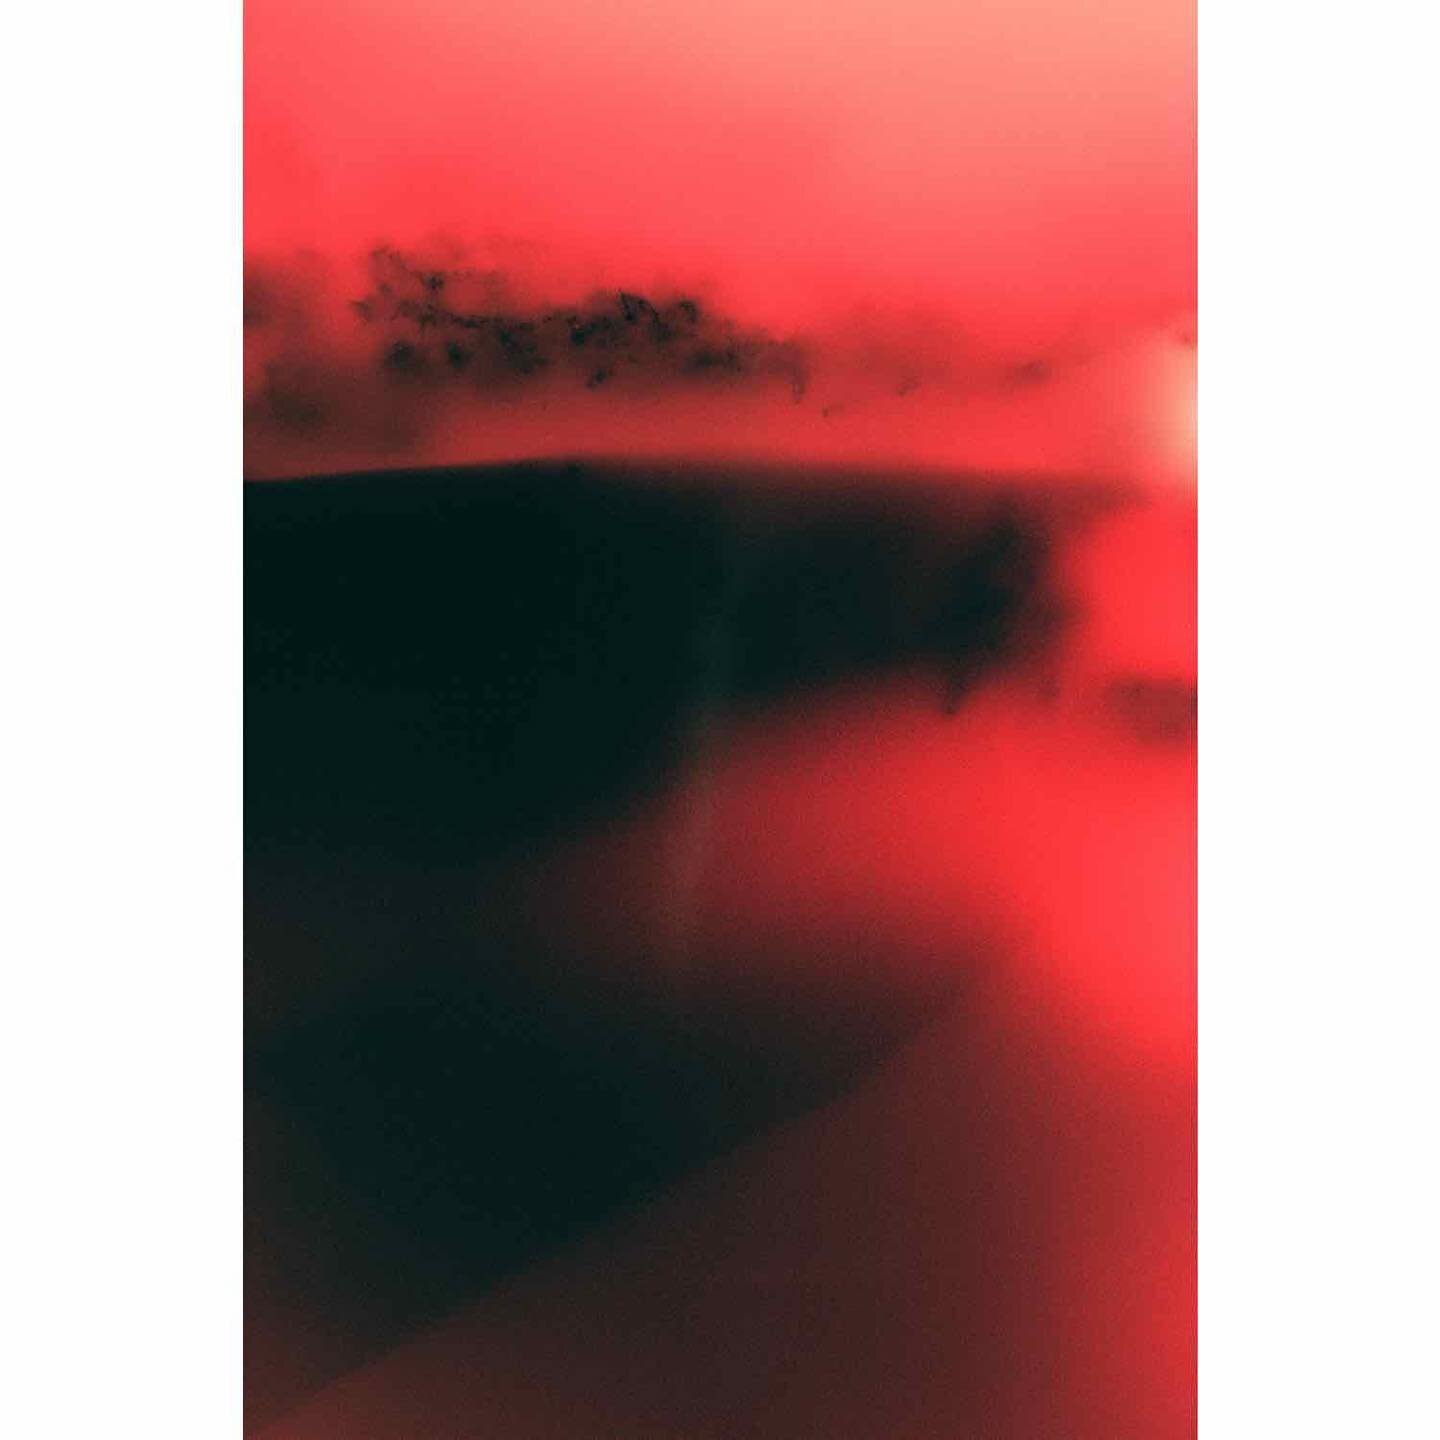 &ldquo;Imagined Landscape #23,&rdquo; 2020. I&rsquo;m excited to share some new work made with an old homemade camera. 
.
.
.
.
.
.
#imaginarymagnitude #theadventurehandbook #ifyouleave #portbox #ignant #analogforever #mytinyatlas #oftheafternoon #su